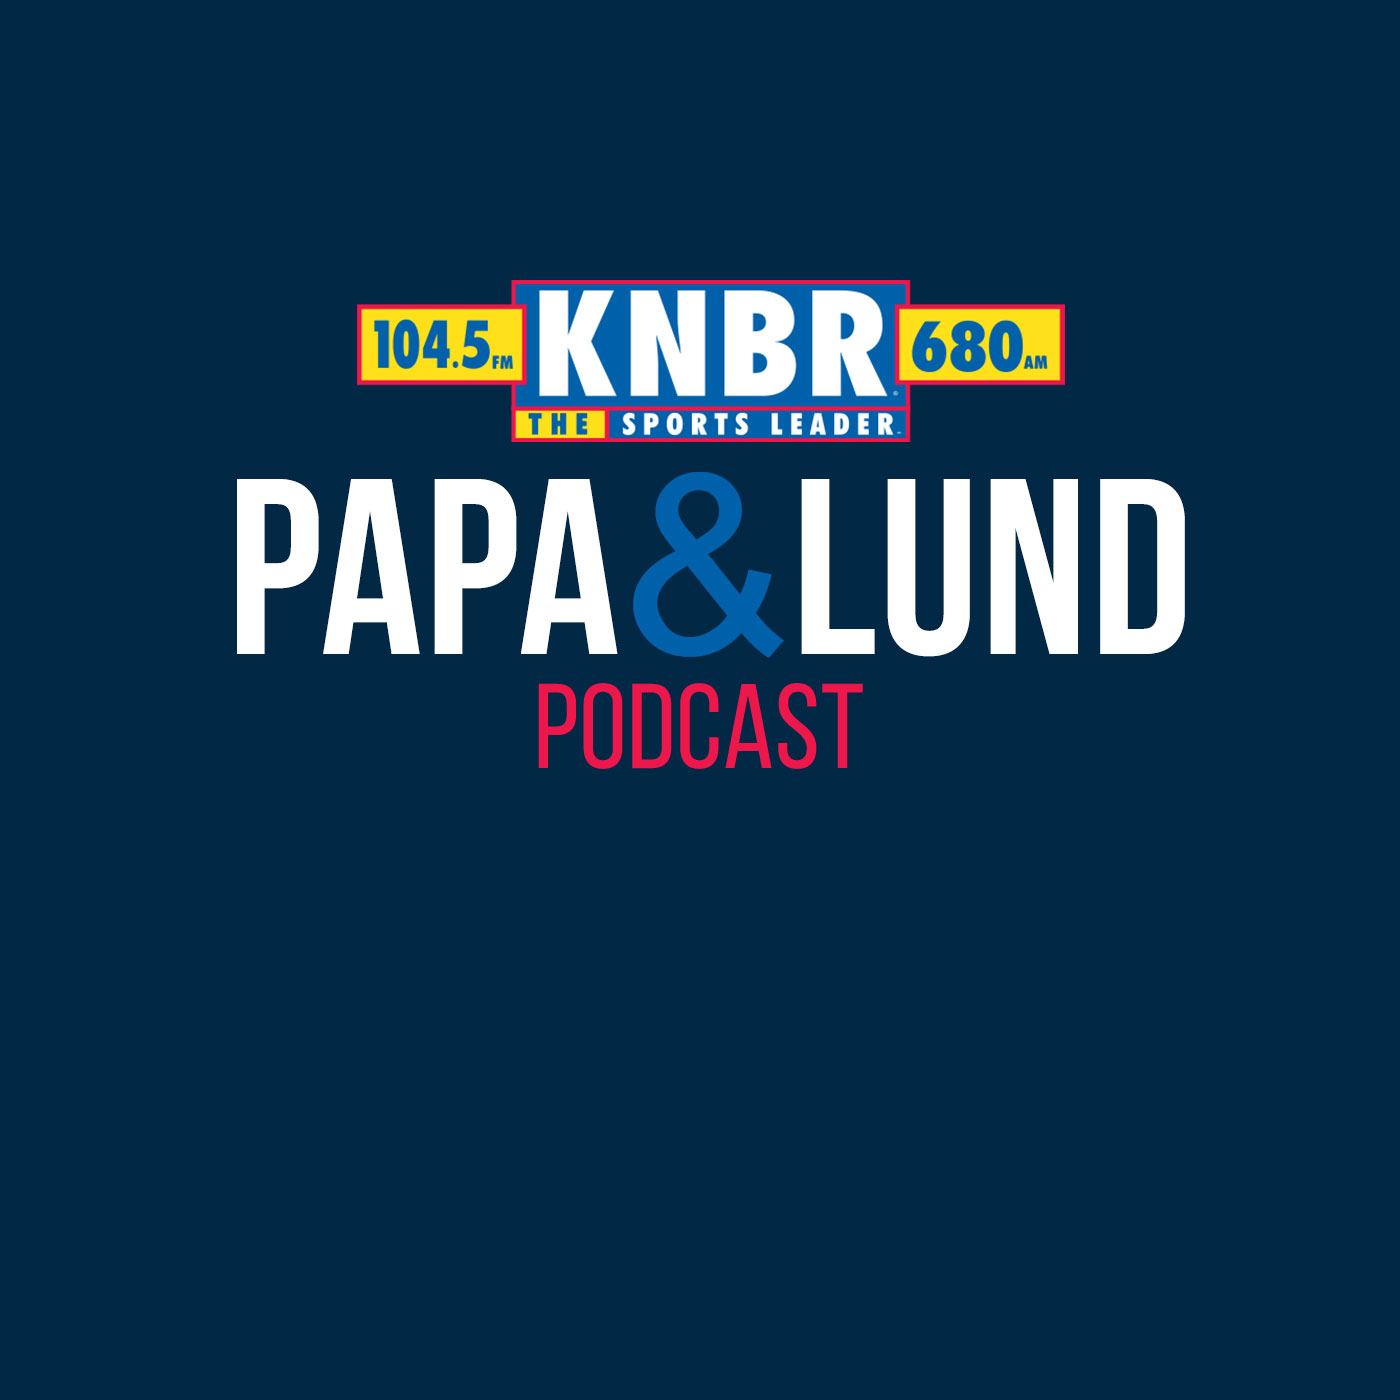 4-11 Garry St Jean joins Papa & Lund to discuss where the Warriors hot streak can land them in the Play-In tournament and how far this Warriors team can go